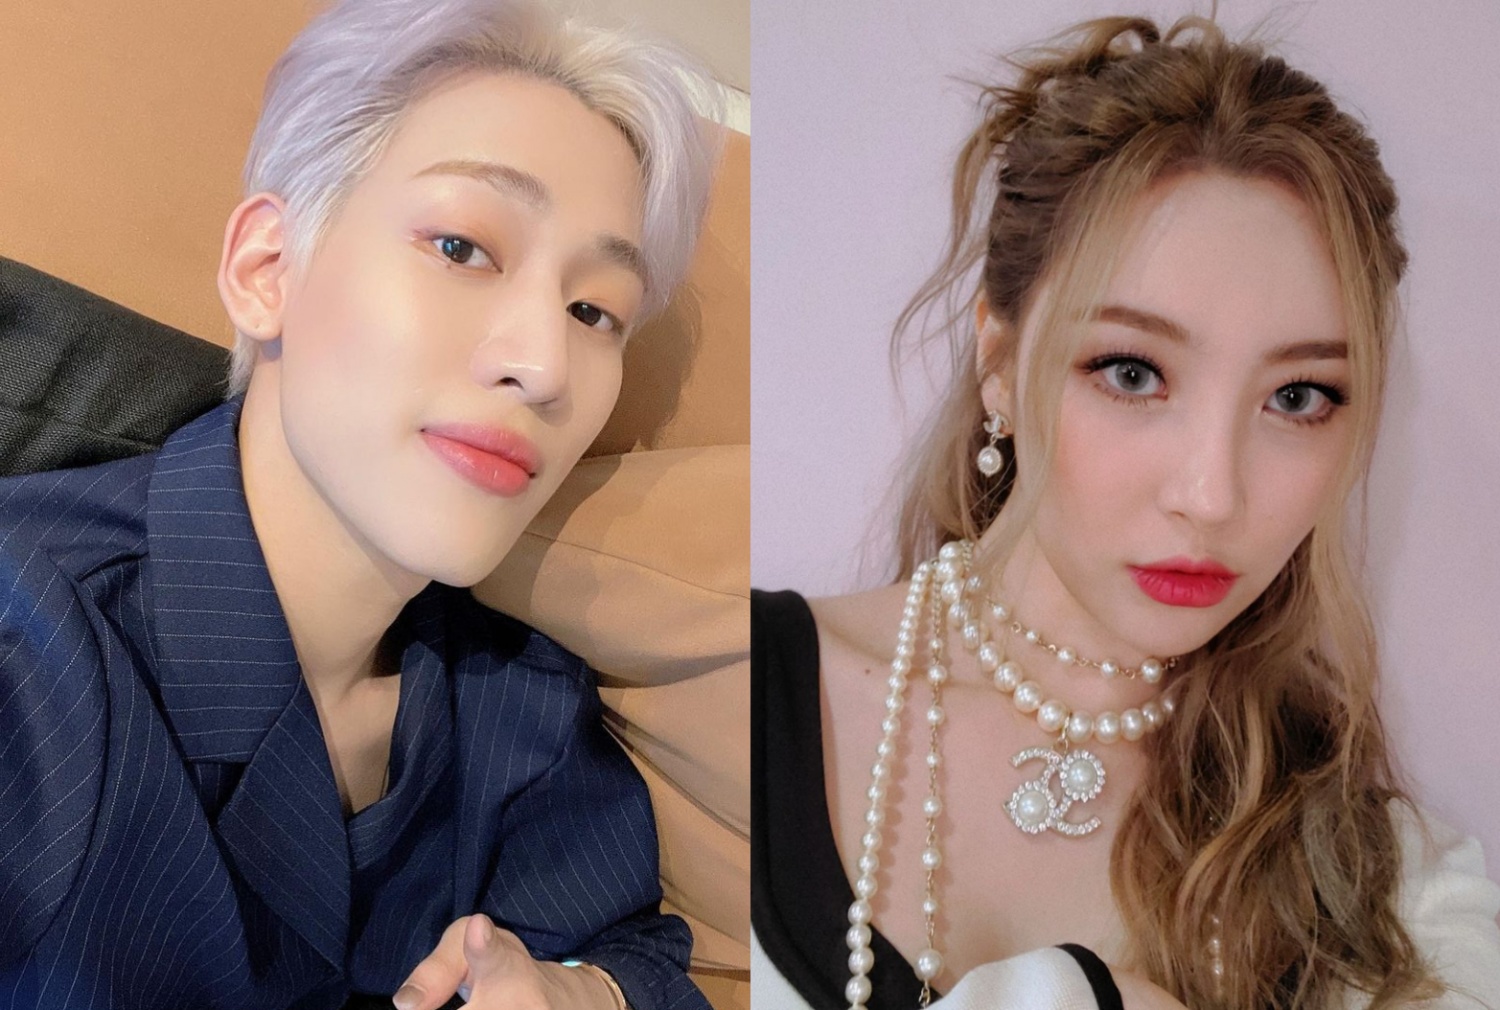 Image for GOT7 BamBam Confesses He Still Feels Shy When He's With Labelmate Sunmi